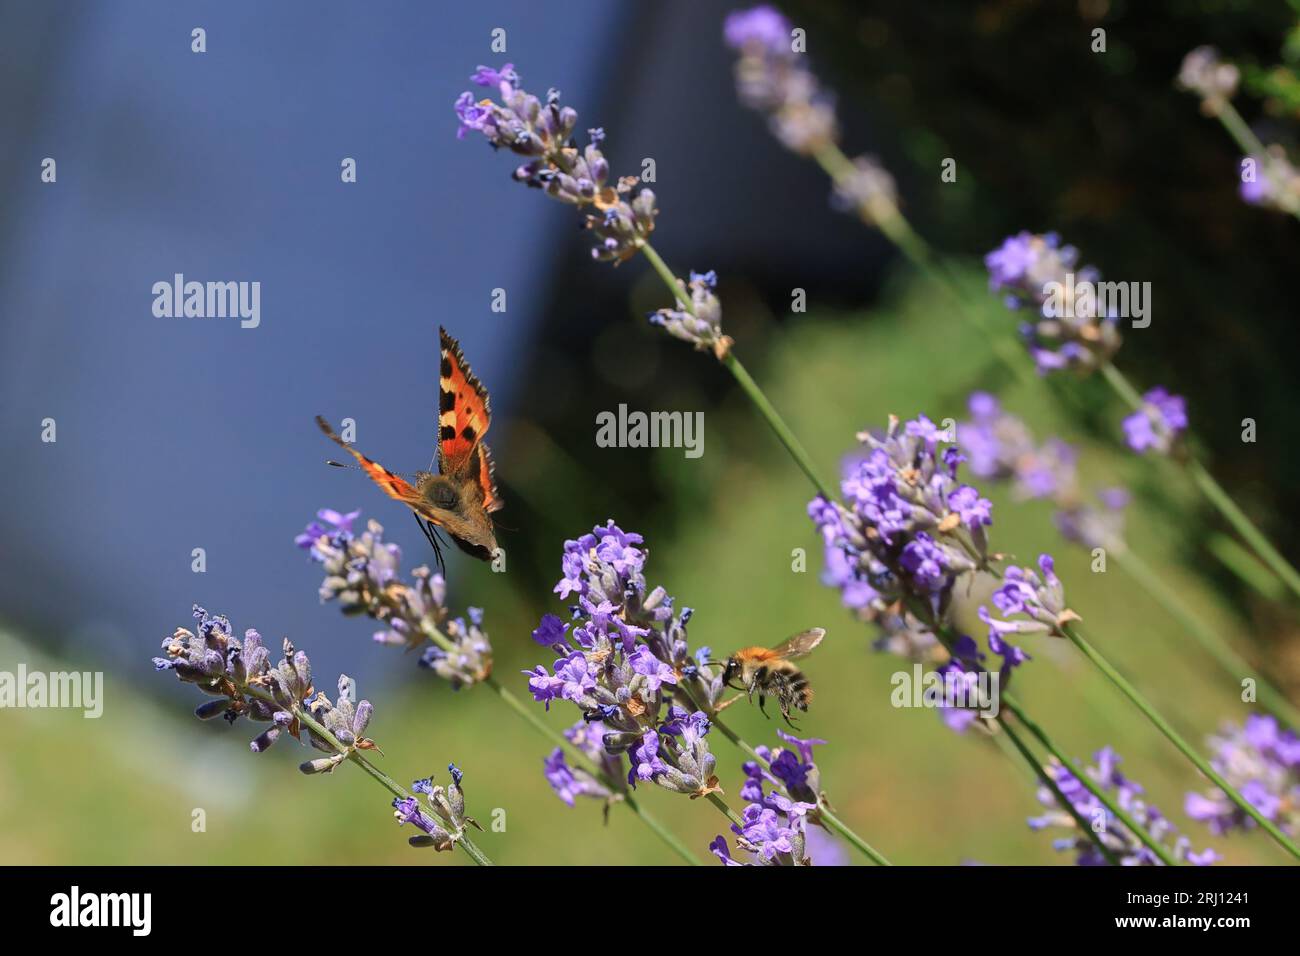 close up of a small tortoiseshell butterfly amidst blooming lavender Stock Photo